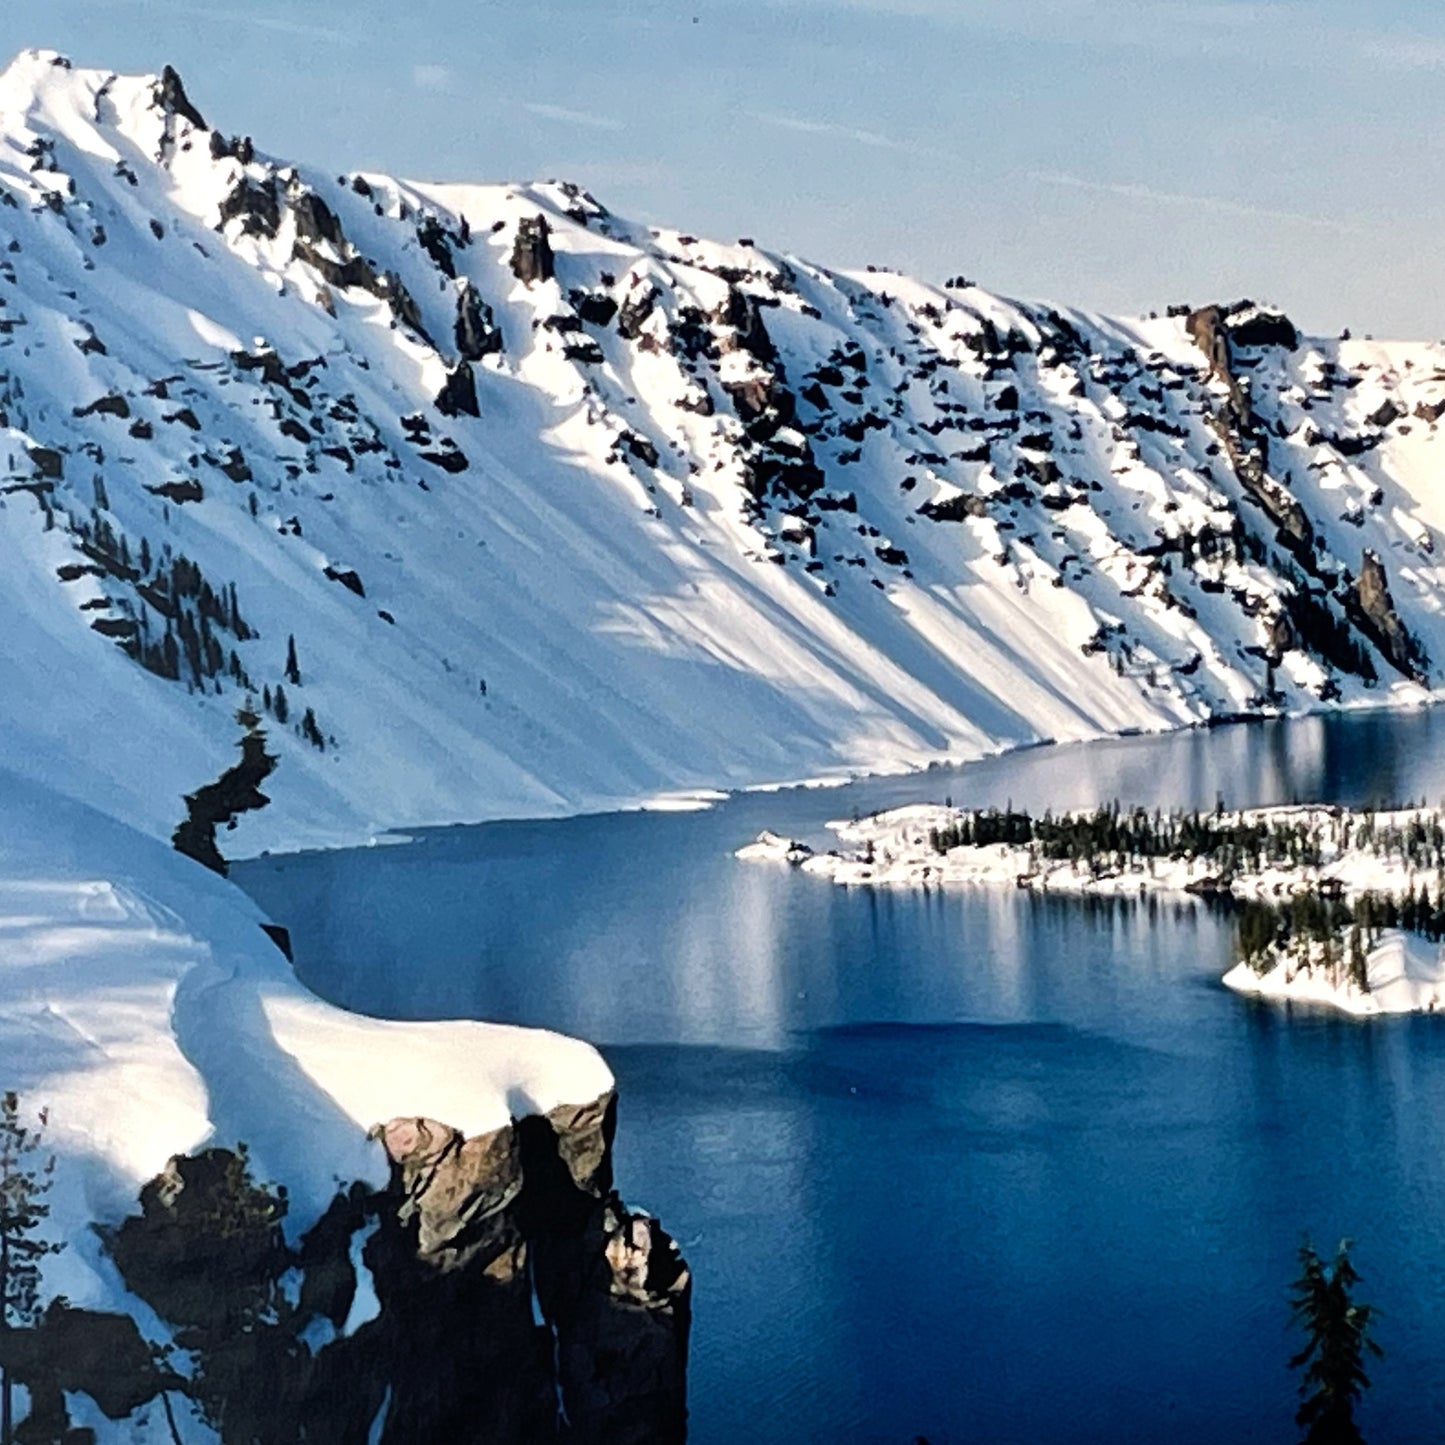 Large Format Panoramic Photograph of Crater Lake OR Wizard Island by Erskine Wood